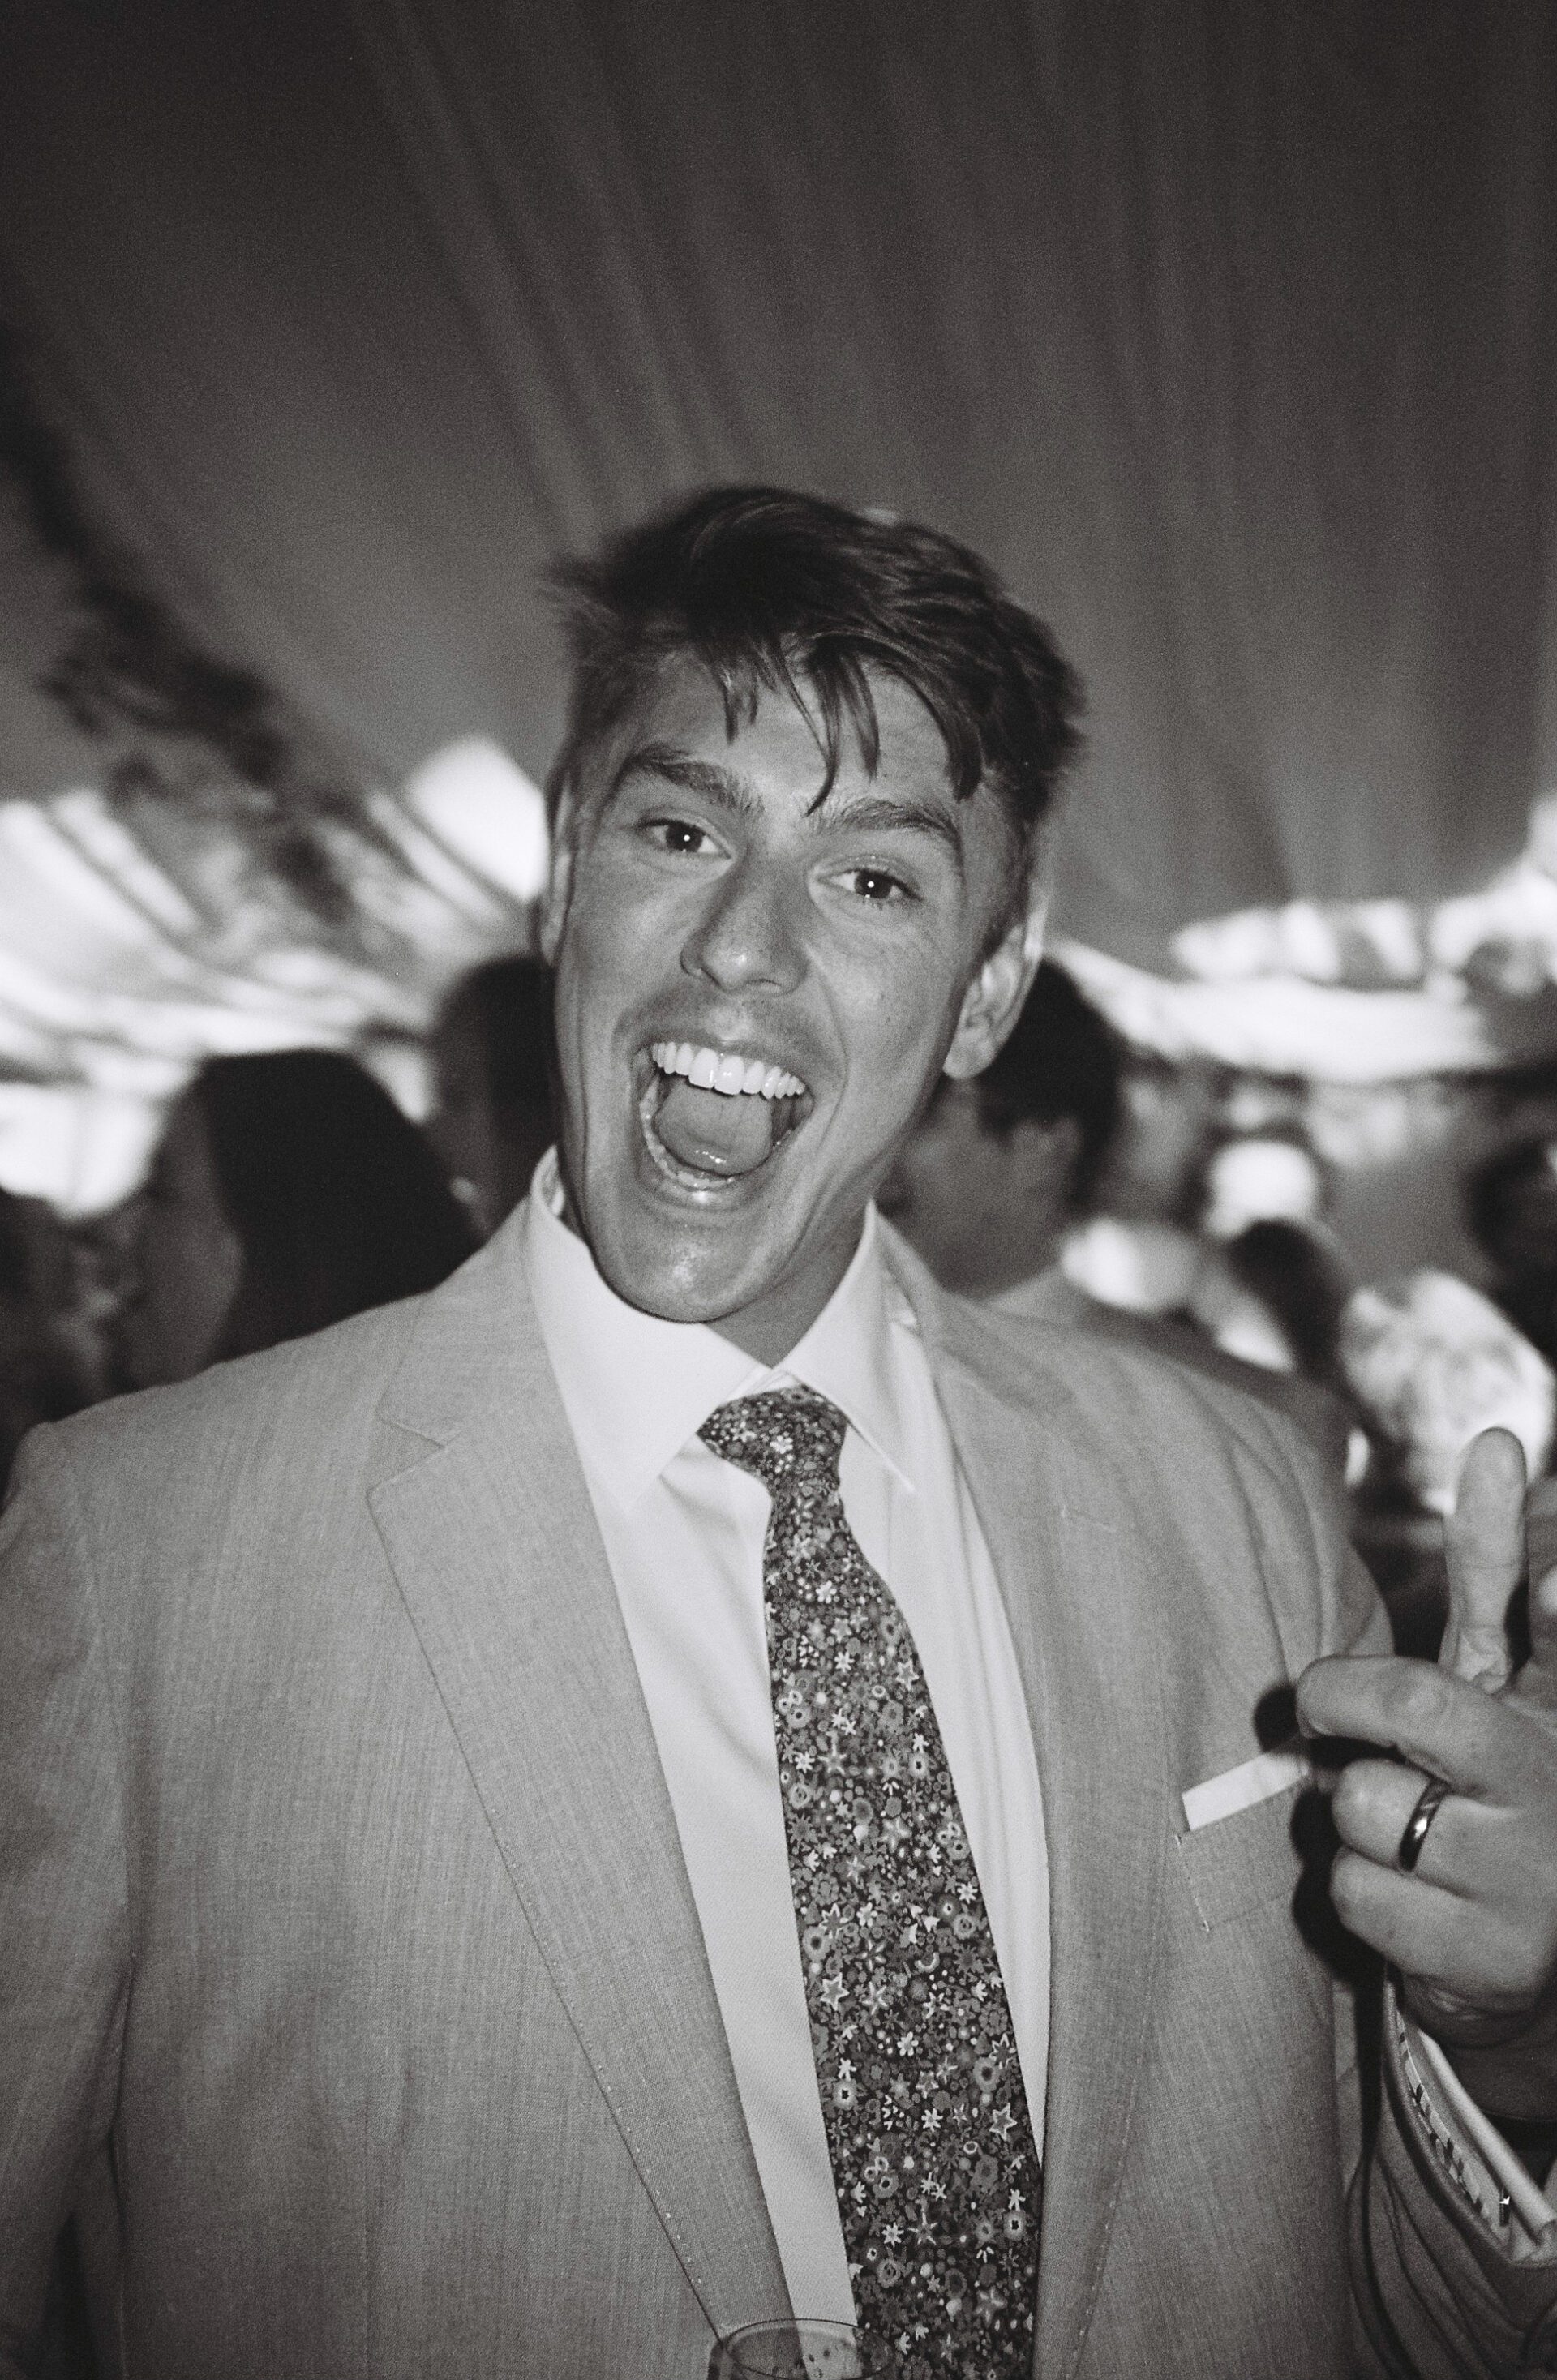 Wedding guest partying captured on 35mm film